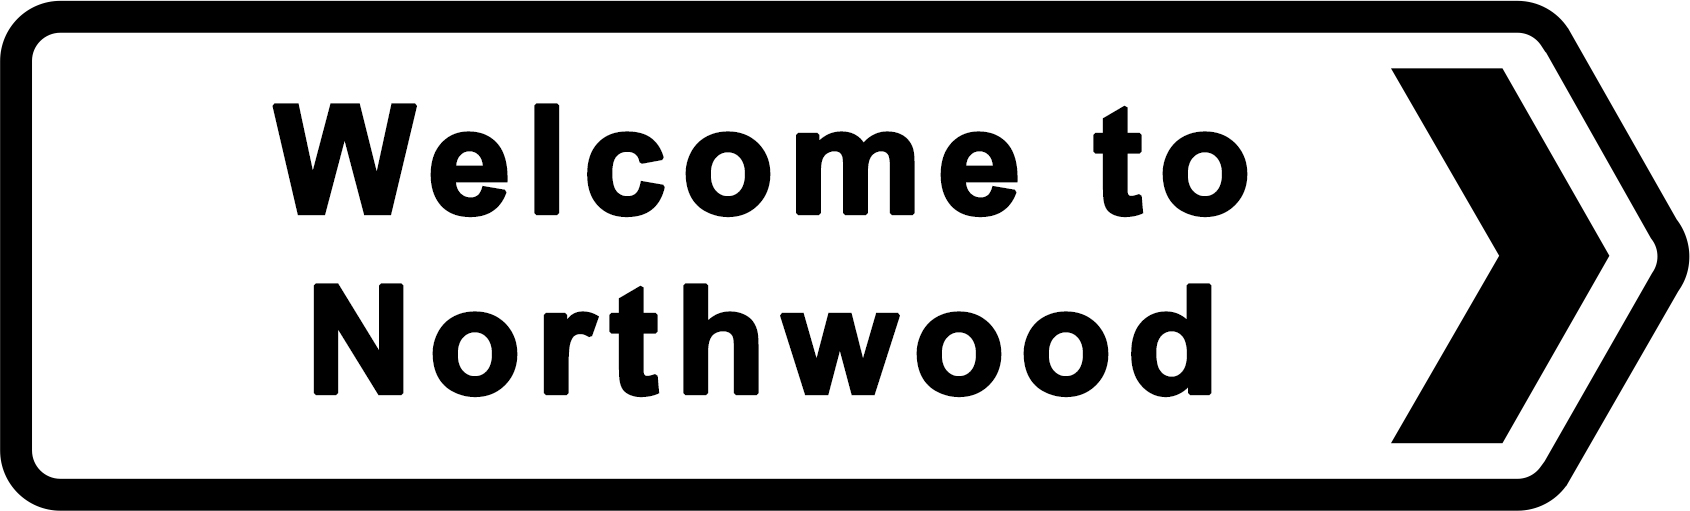 Welcome to Northwood College - Cheap Driving Schools Lessons in Northwood, HA6, London borough of Hillingdon, Greater London